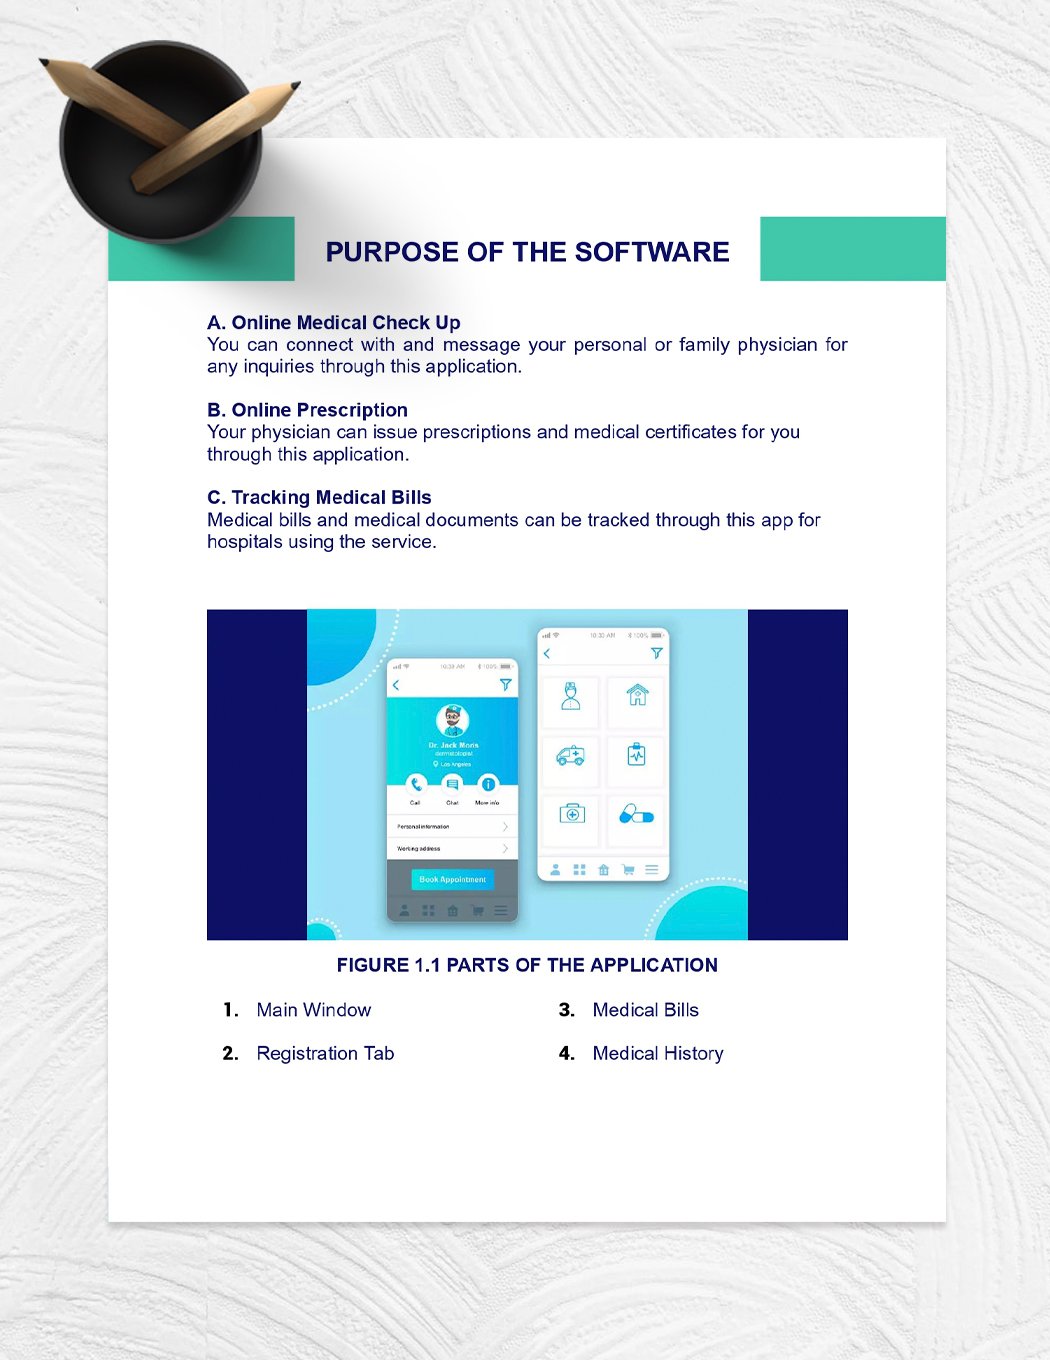 Software Instruction Manual Template in Word Google Docs Download